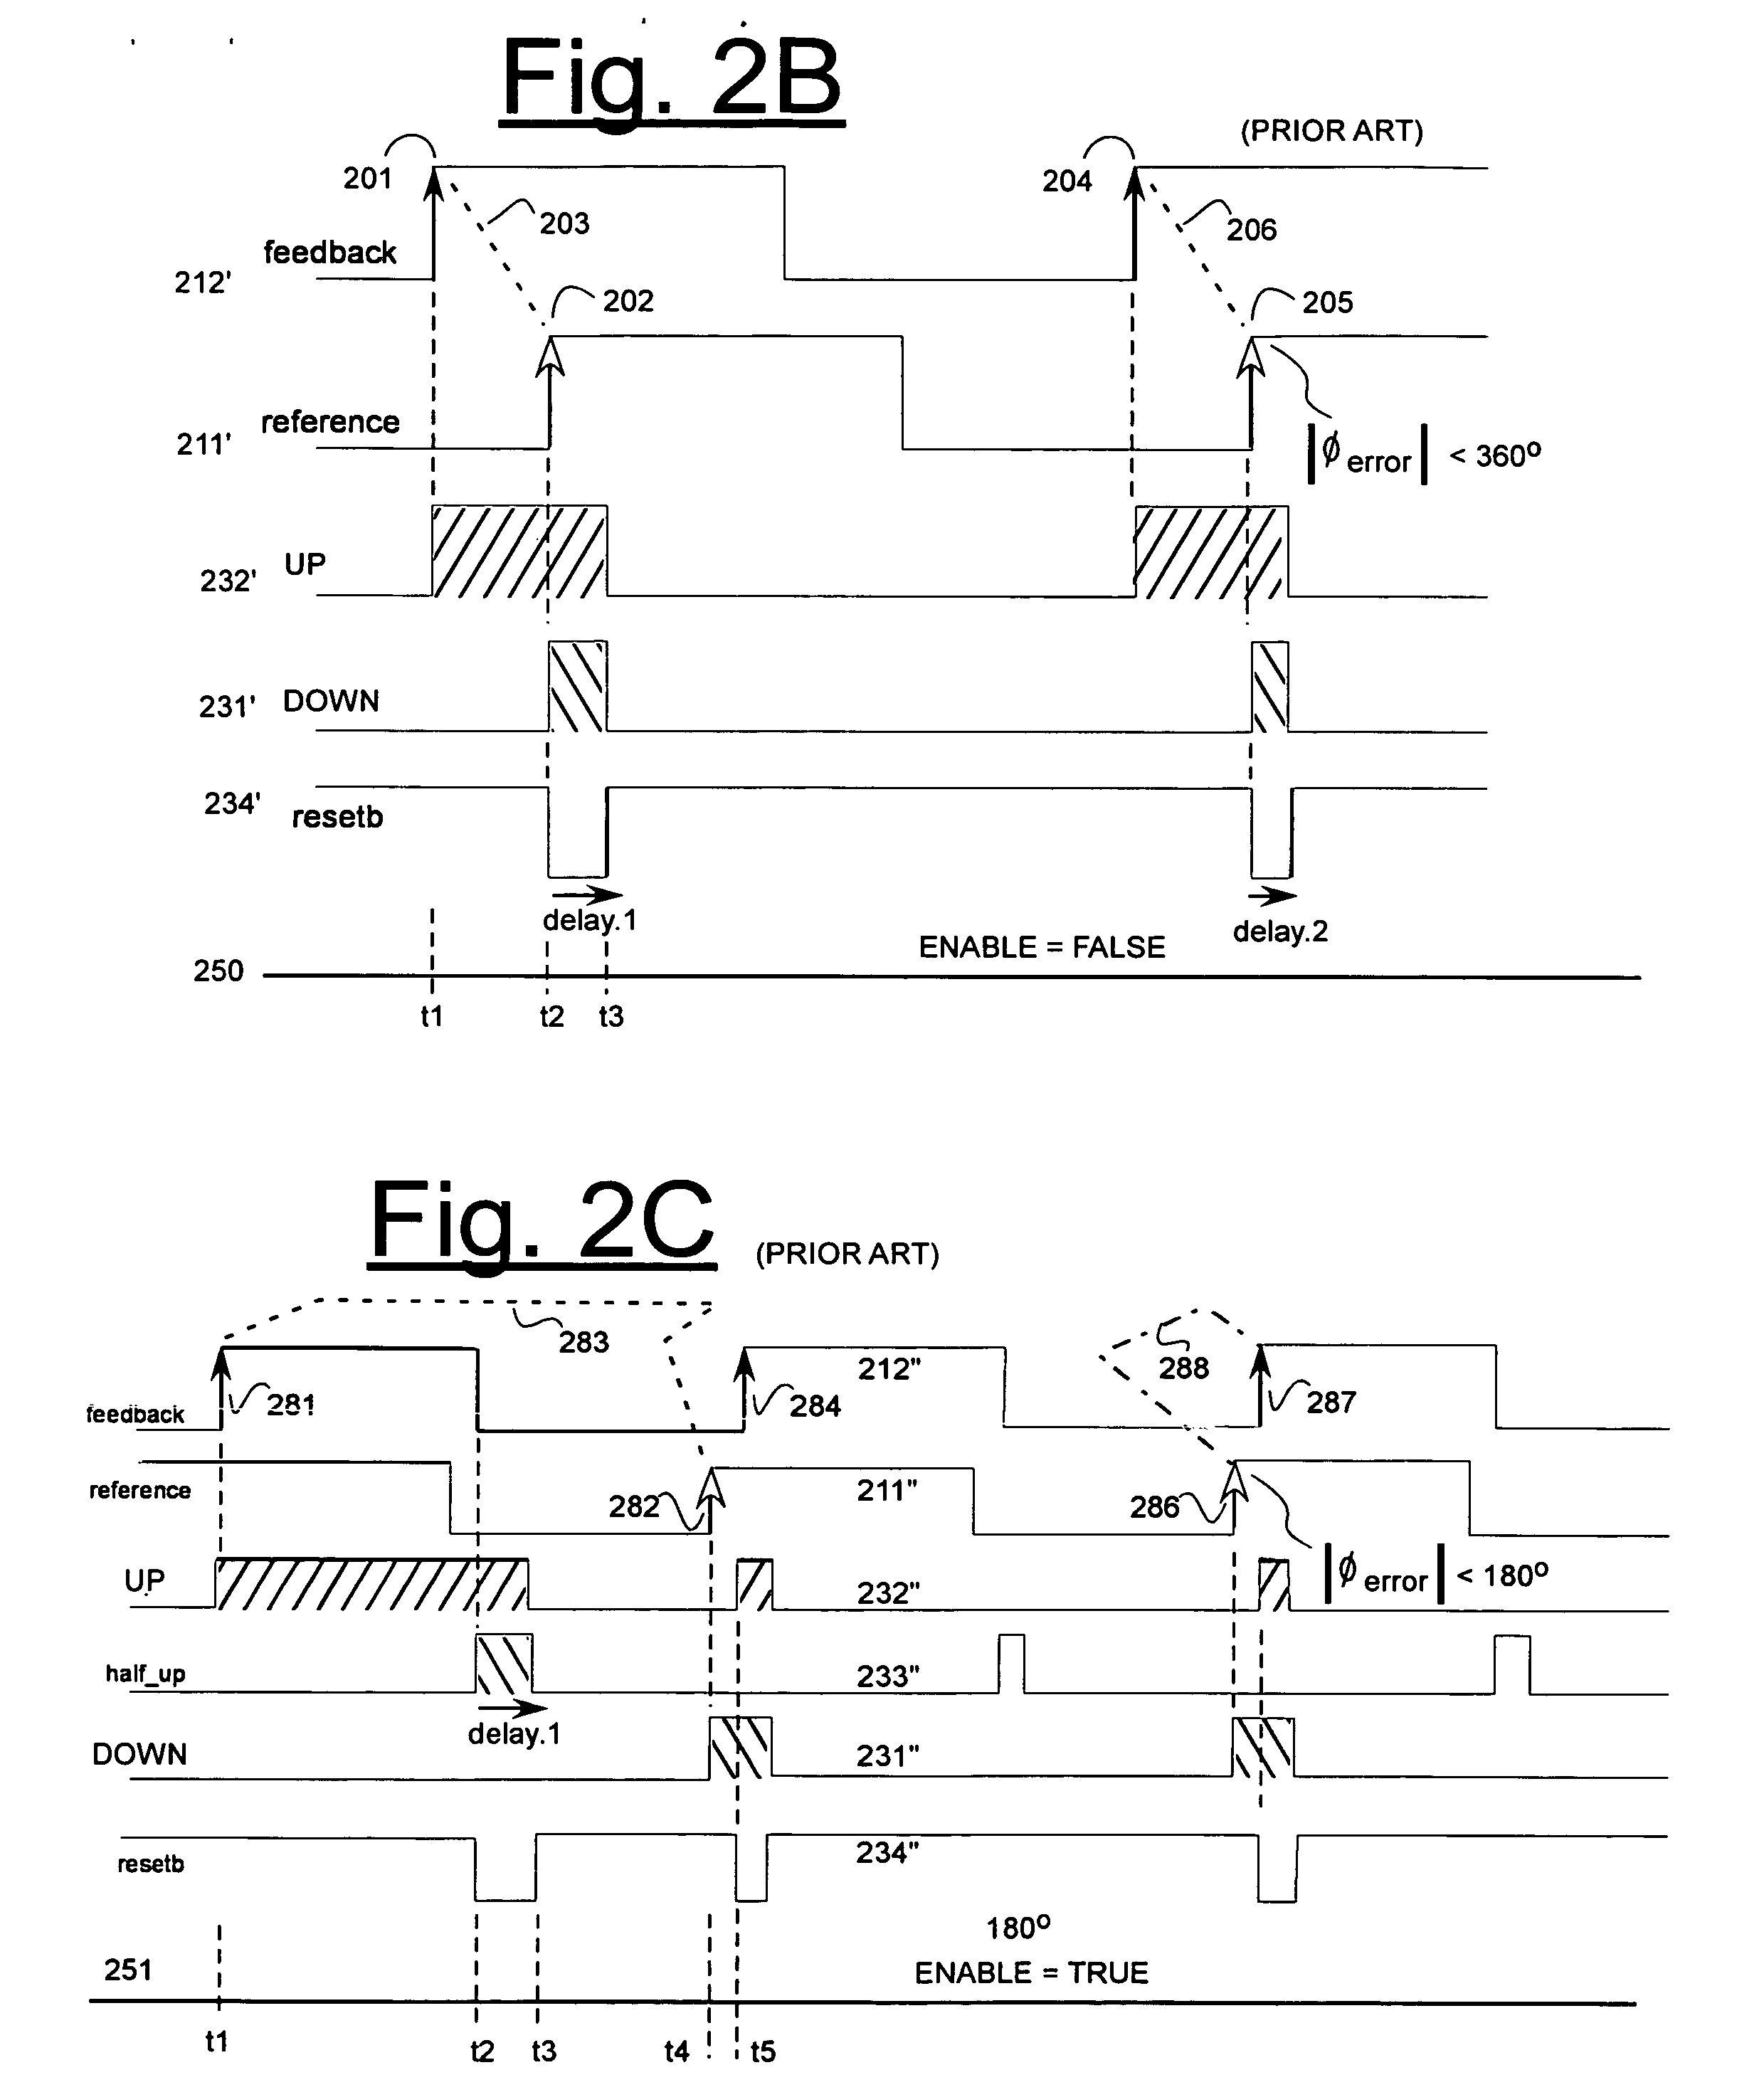 Phase difference detector having concurrent fine and coarse capabilities